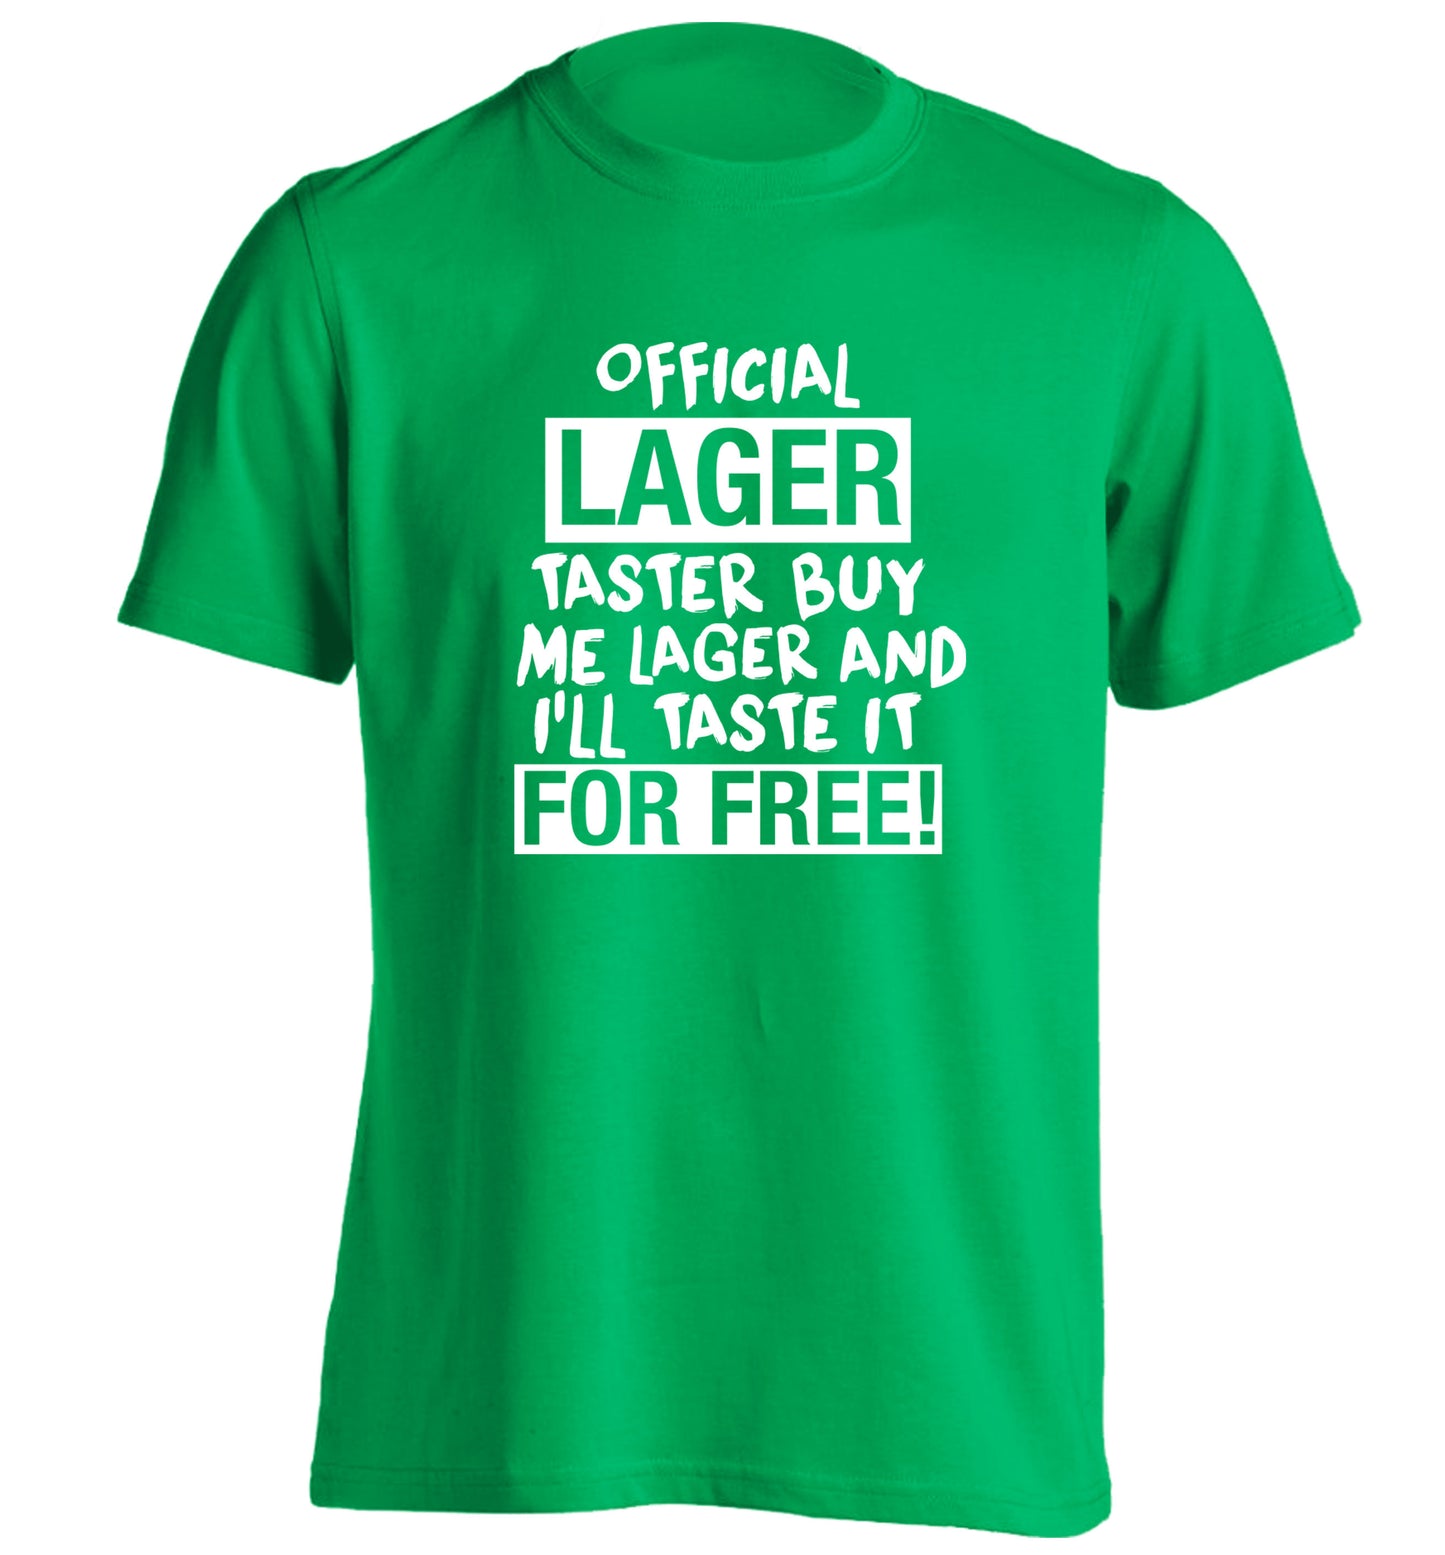 Official lager taster buy me lager and I'll taste it for free! adults unisex green Tshirt 2XL